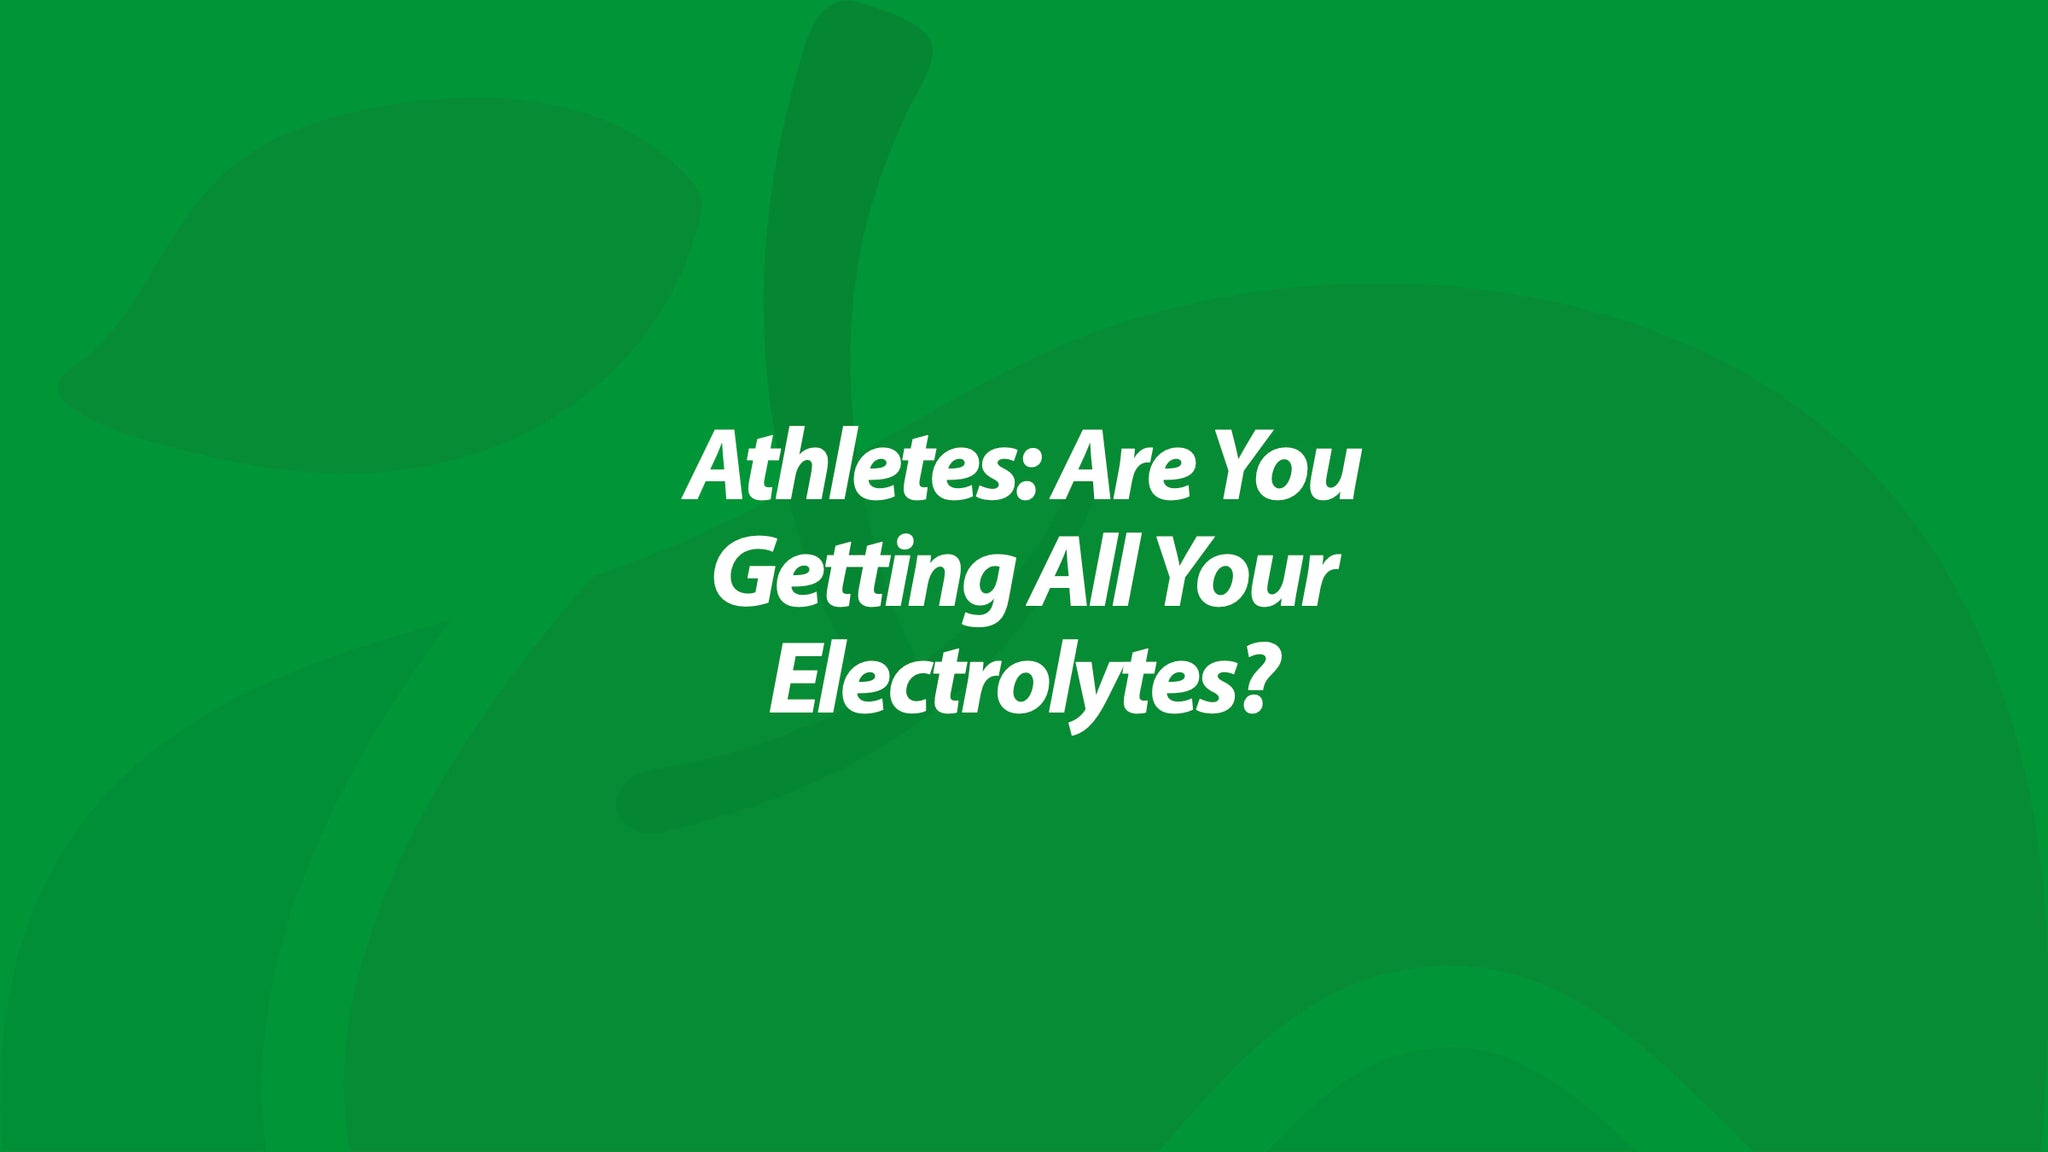 Athletes: Are You Getting All Your Electrolytes?